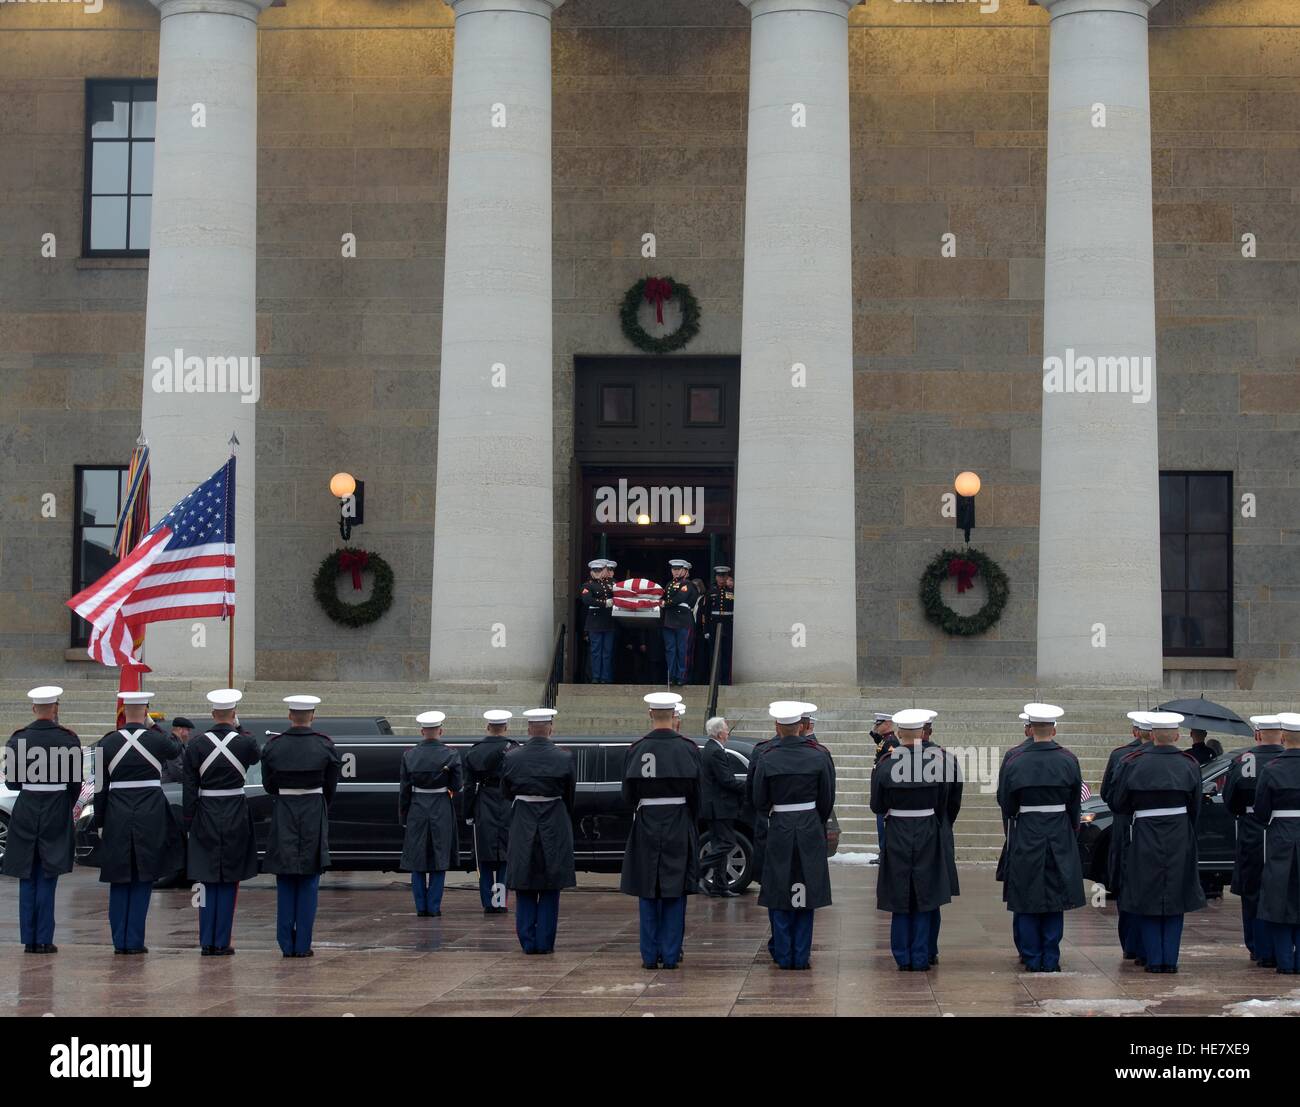 U.S. Marine Corps honor guard escort the casket of astronaut and former Senator John Glenn from the Ohio Statehouse during the funeral procession December 17, 2016 in Columbus, Ohio. The former Marine pilot, Senator and first man to orbit the earth died last week at the age of 95. Stock Photo